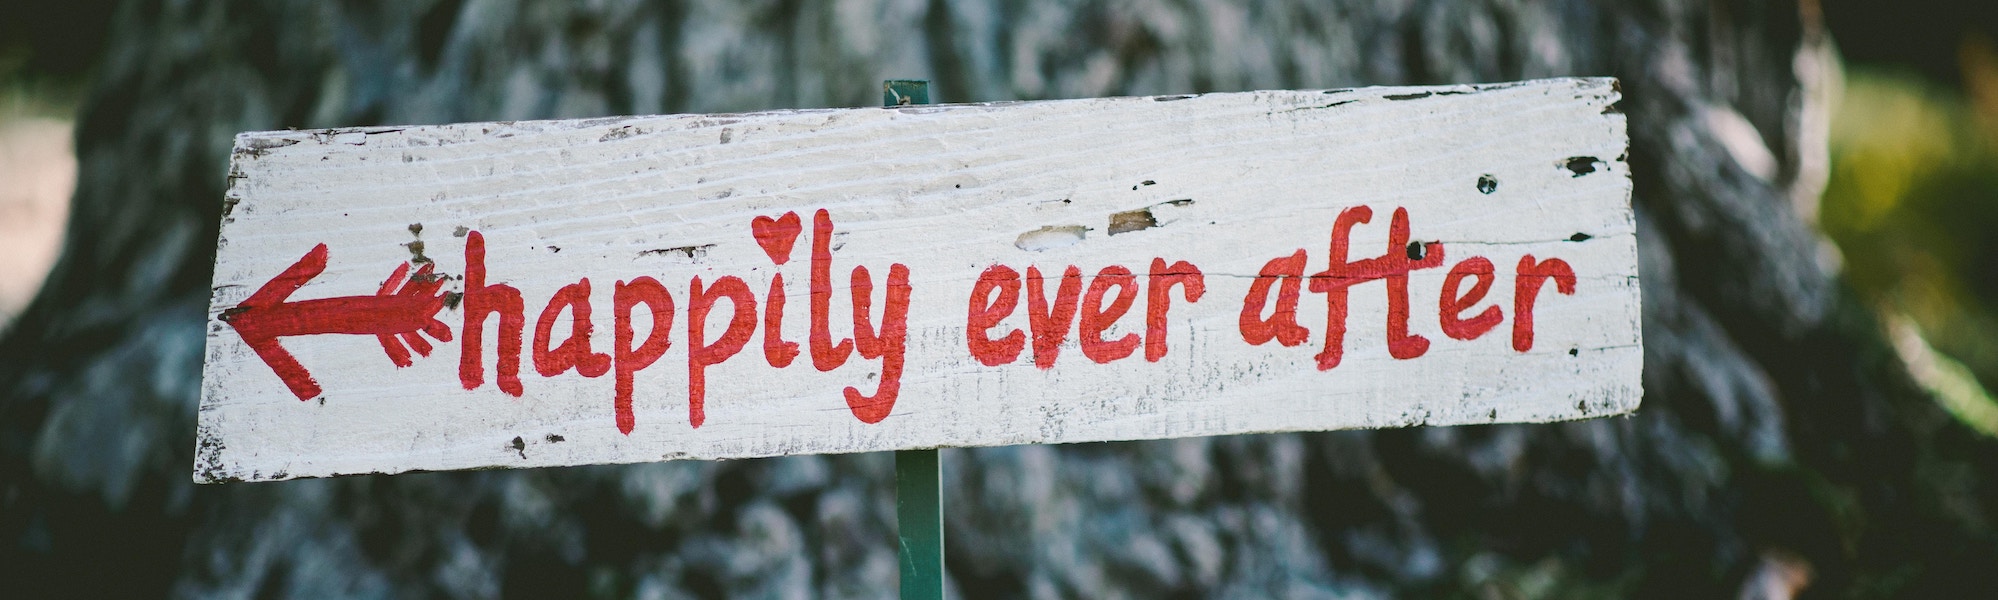 Happily Ever After sign illustrating God's dream for your marriage